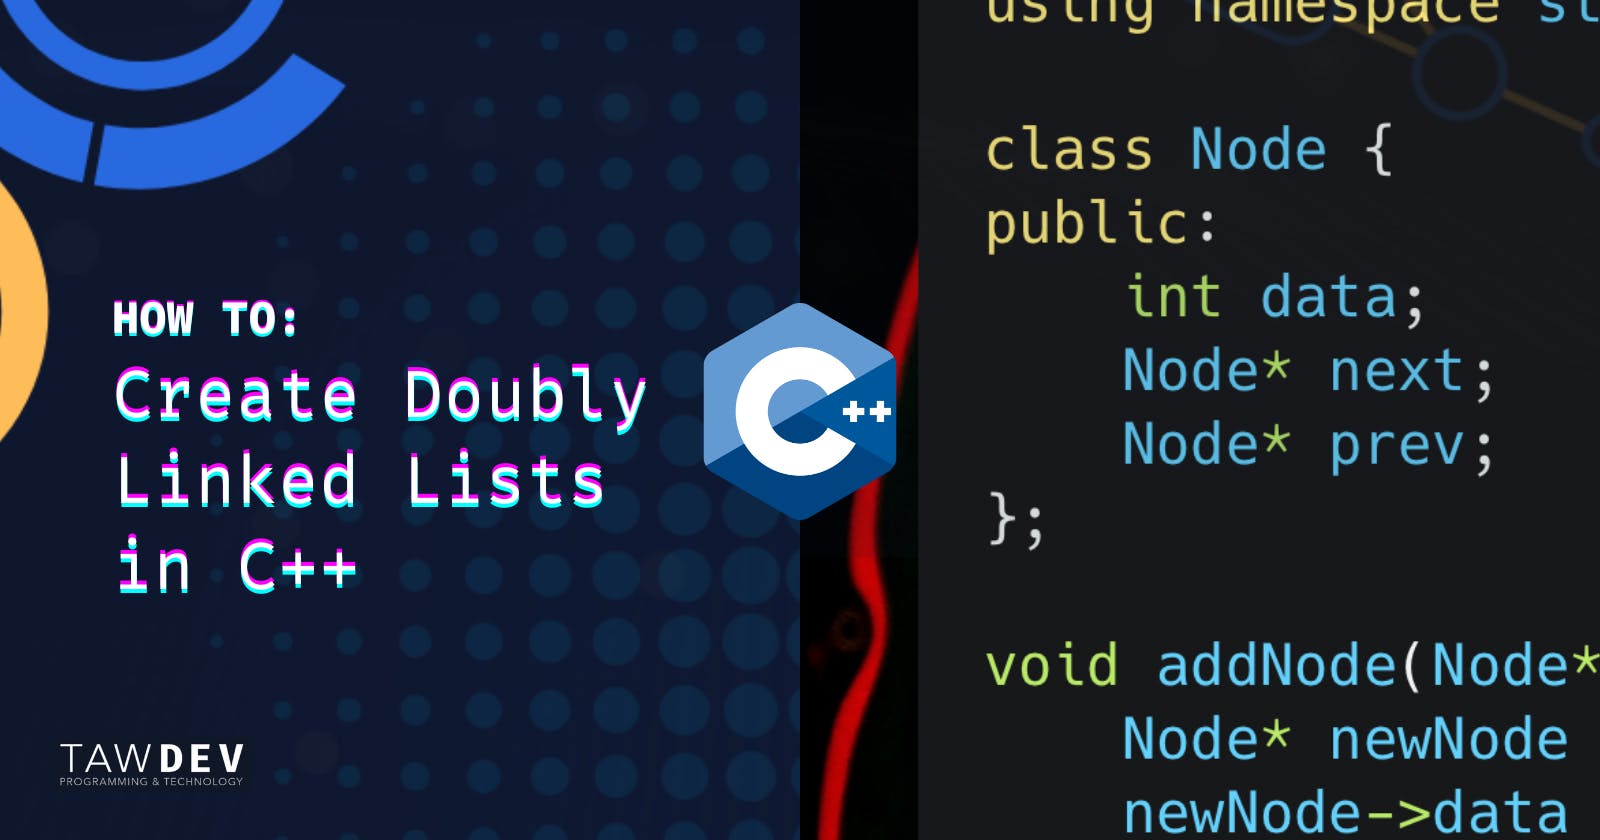 How to Create a Doubly Linked List in C++